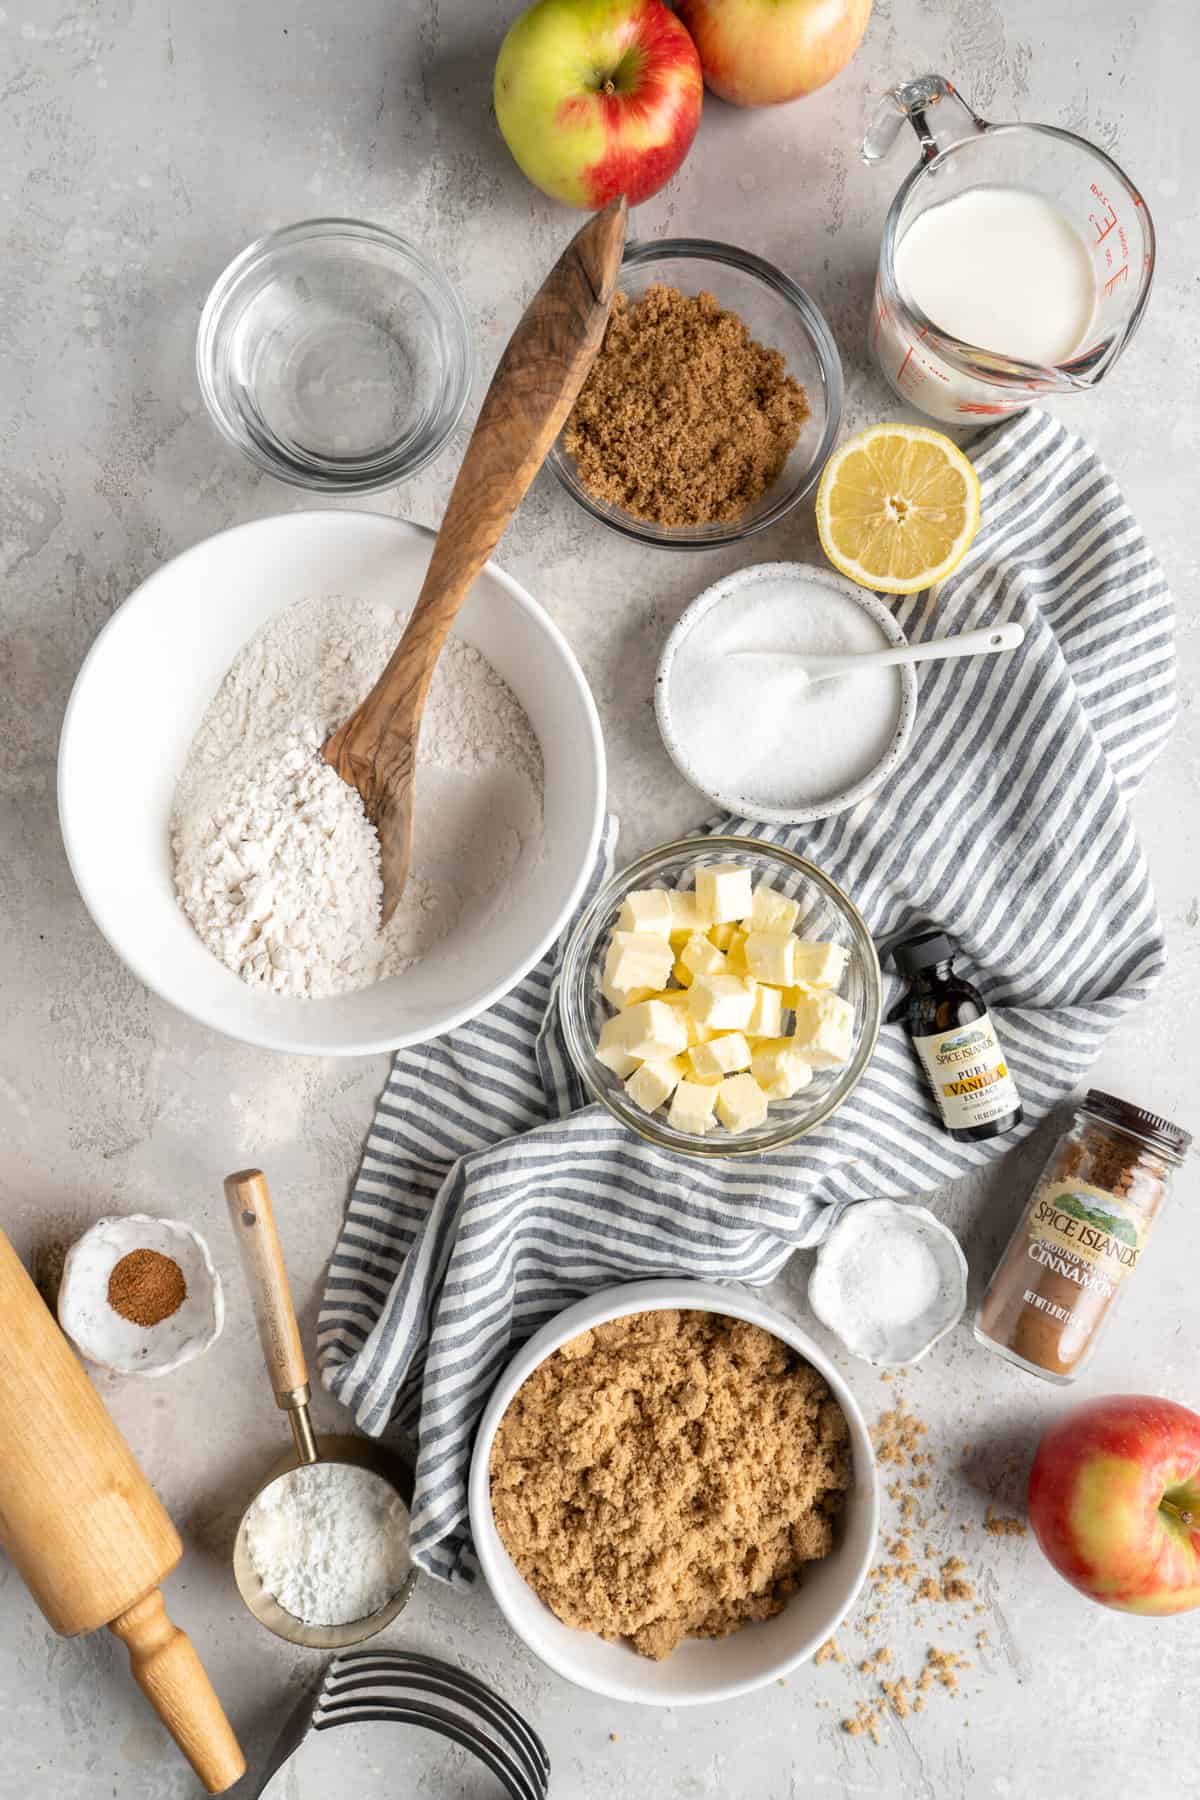 Ingredients in separate bowls to make an apple pie